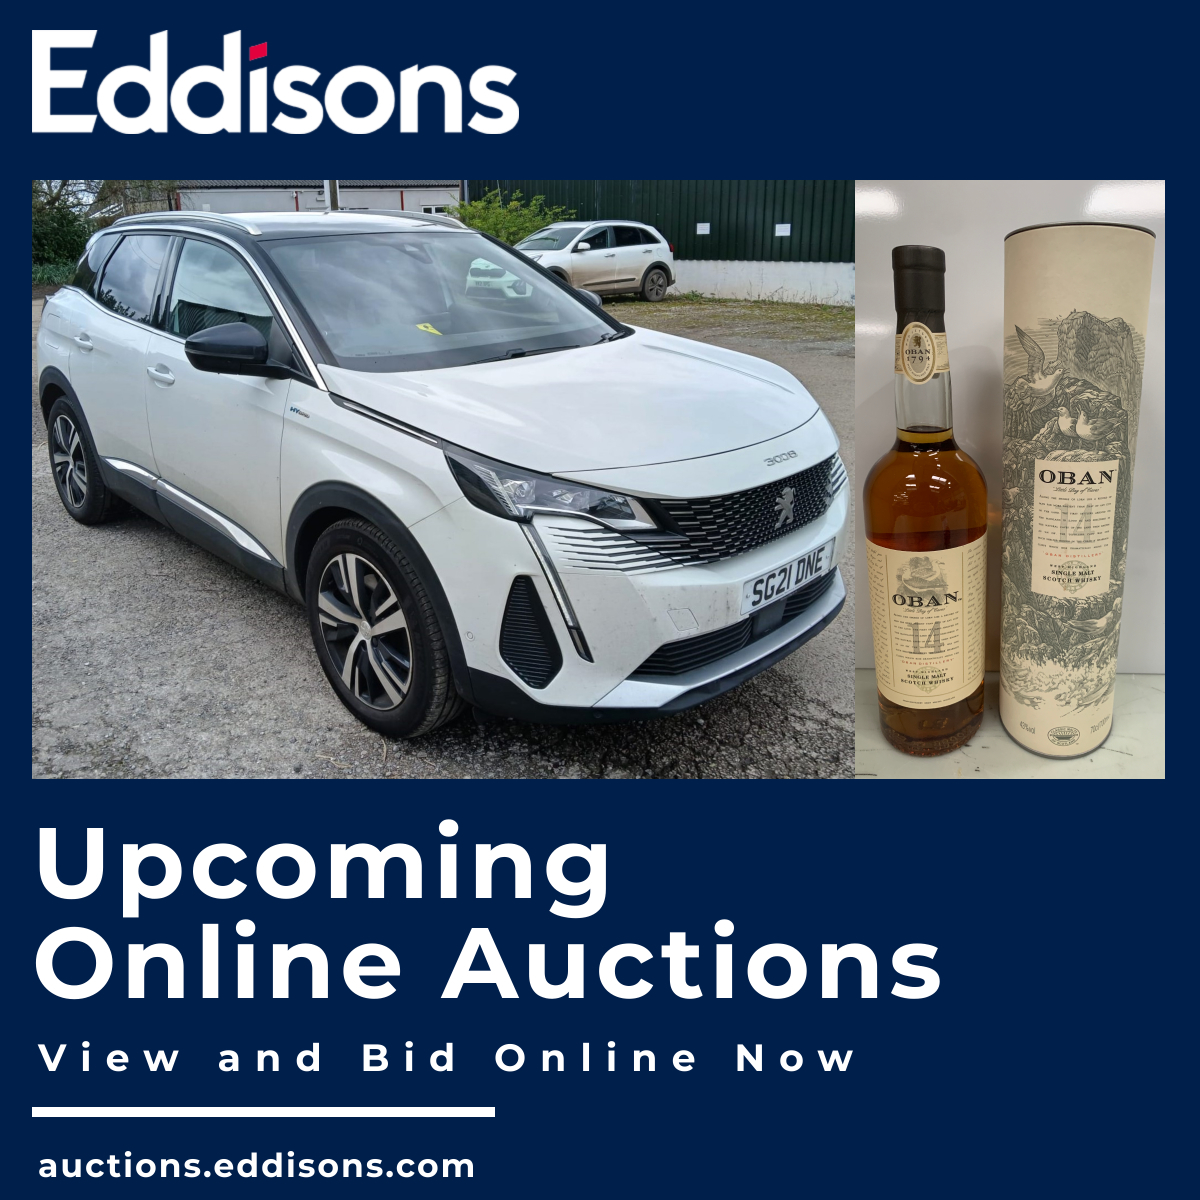 Upcoming Auctions with Eddisons

For further information on all our upcoming auctions or to sign up to bid and view the catalogues visit eddisons.com

#auctions #online #upcoming #thisweek #bid #bidding #happybidding #alcohol #pianoo #iPads #Apple #vehilcle #Peugeot